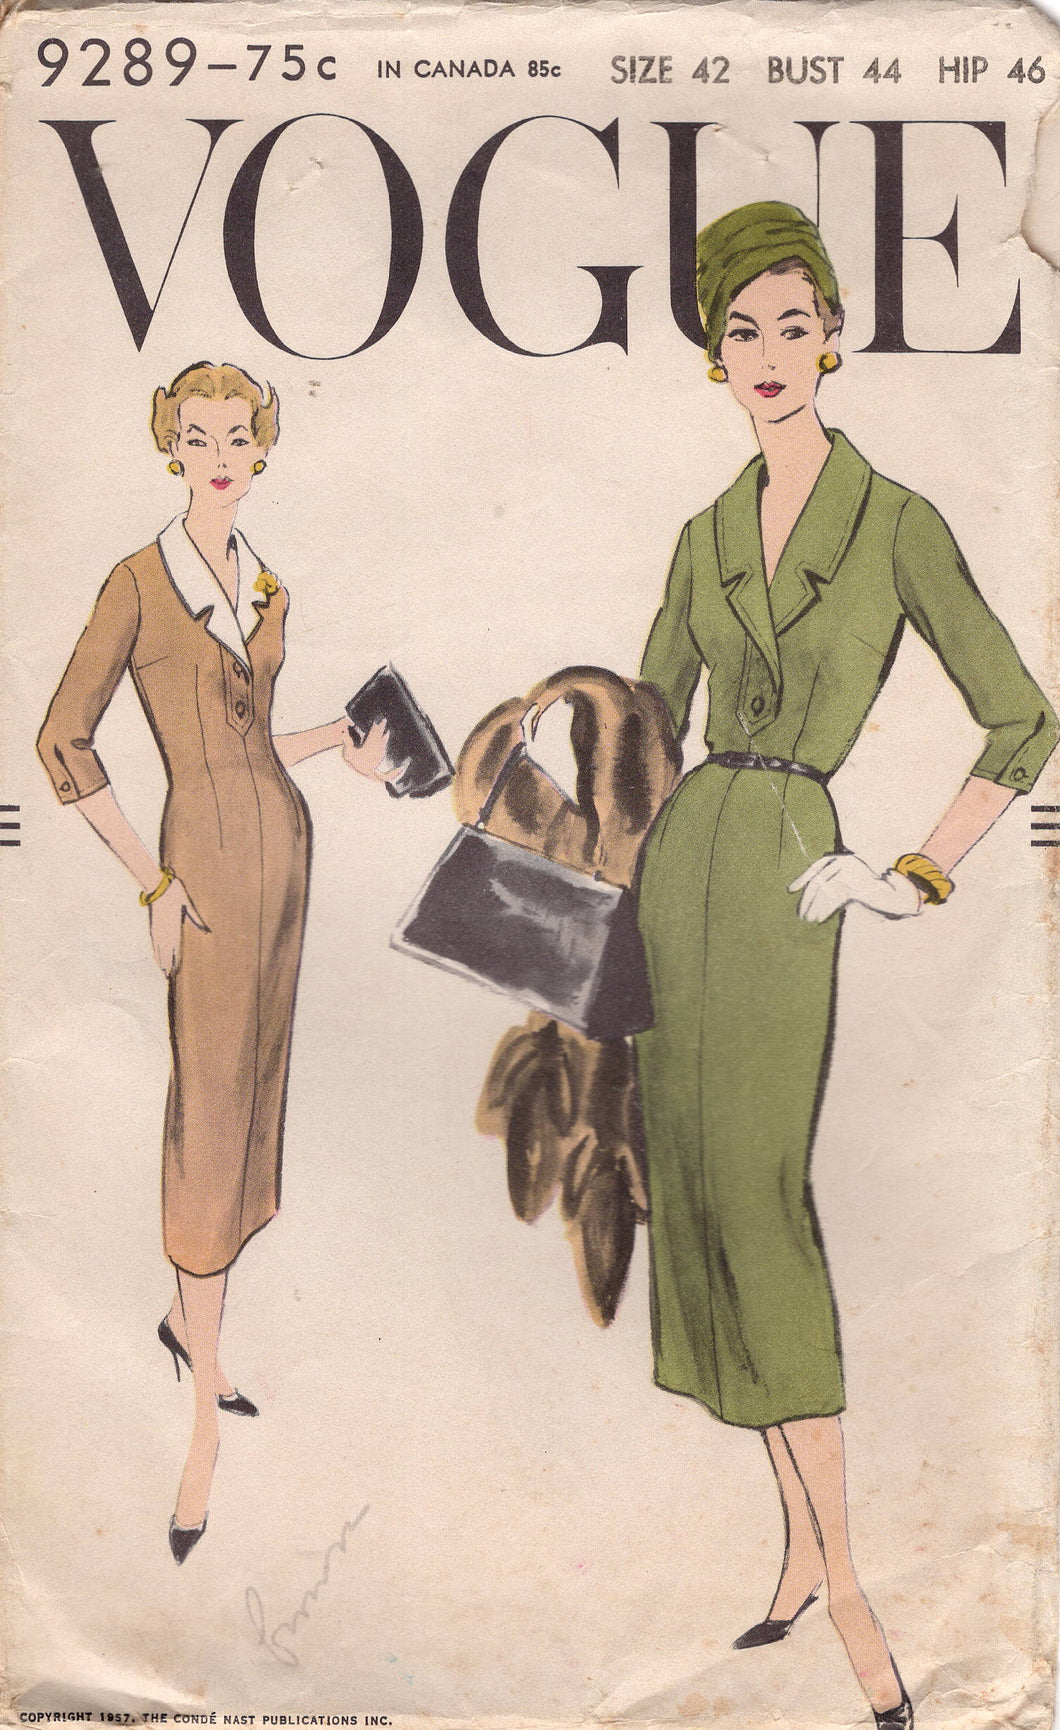 1950's Vogue One-Piece Sheath Dress Pattern with Large Collar and 3/4 Sleeve - Bust 44